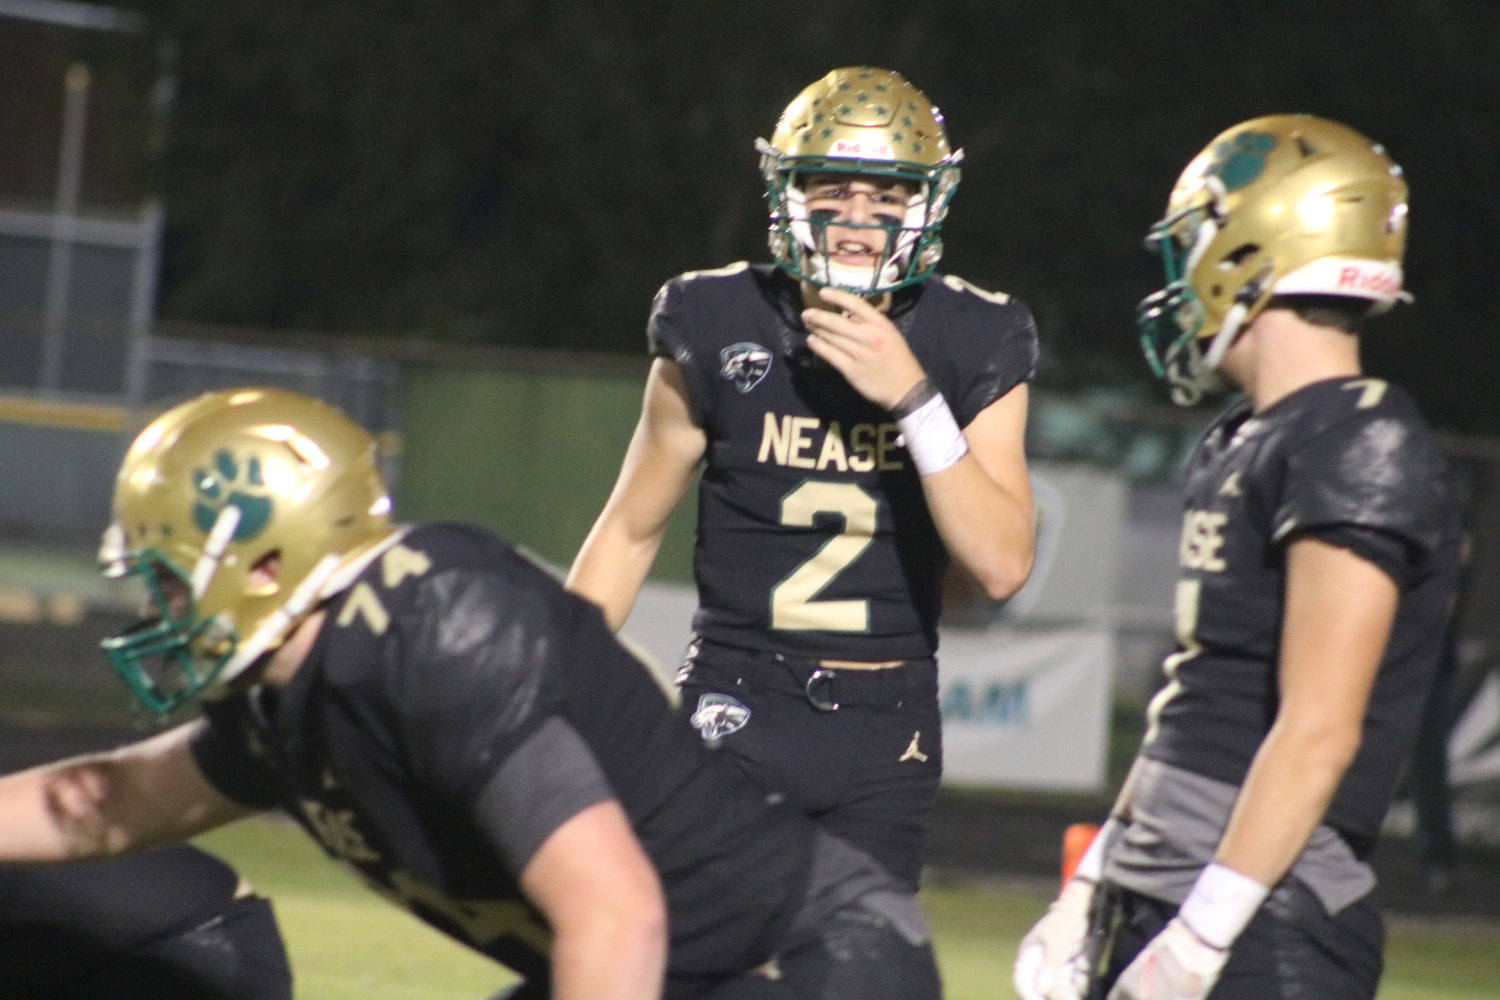 Nease quarterback Marcus Stokes makes an adjustment at the line of scrimmage against First Coast. He finished with five touchdowns on the night, three passing and two rushing.